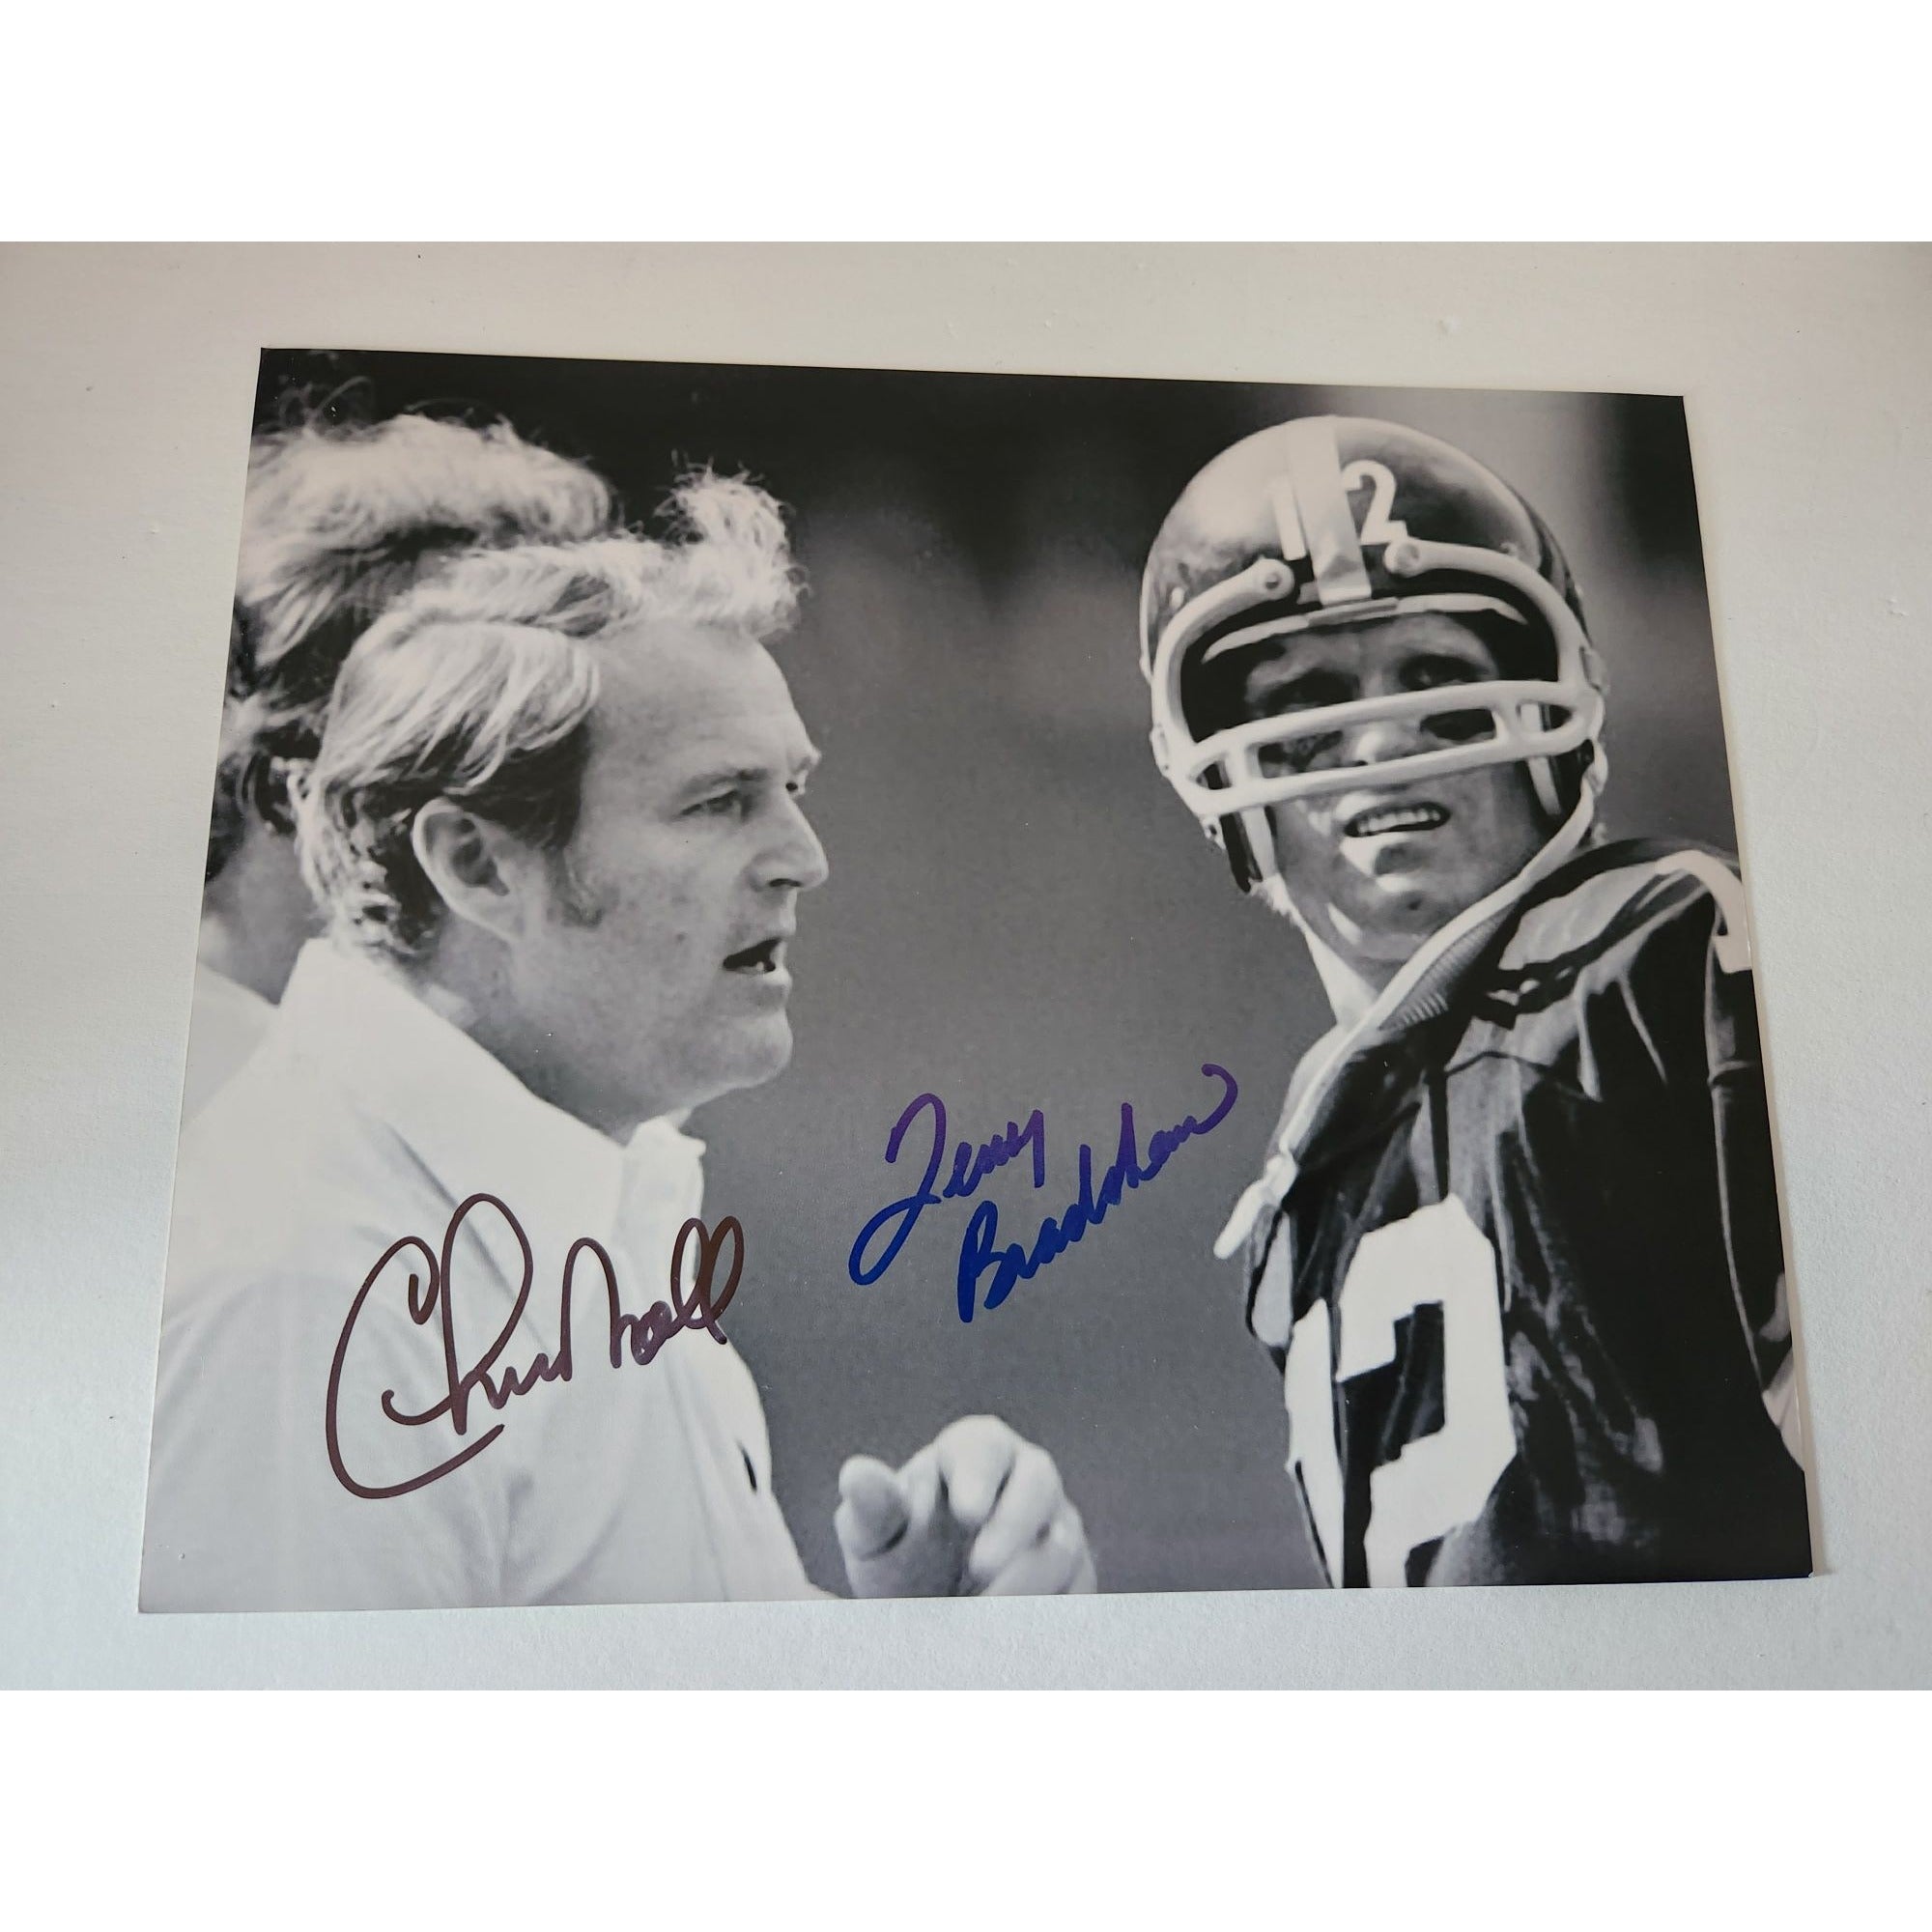 Pittsburgh Steelers Terry Bradshaw and Chuck Noll 8x10 photo signed